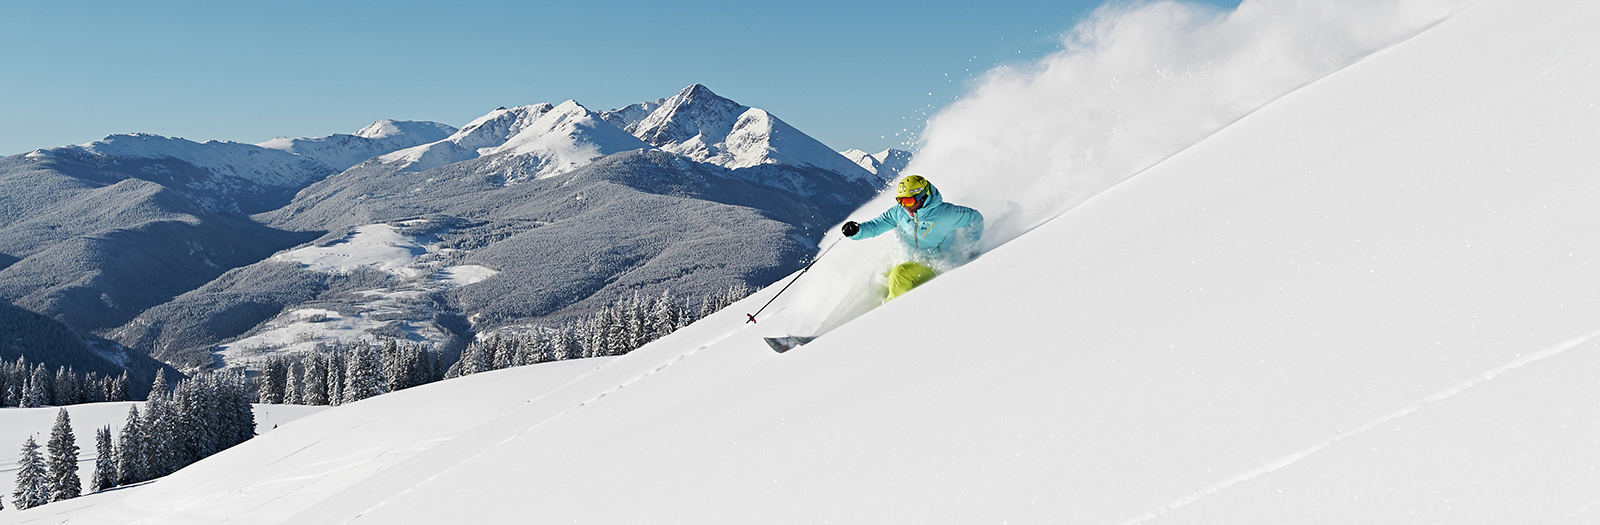 vail lodging and lift ticket deals